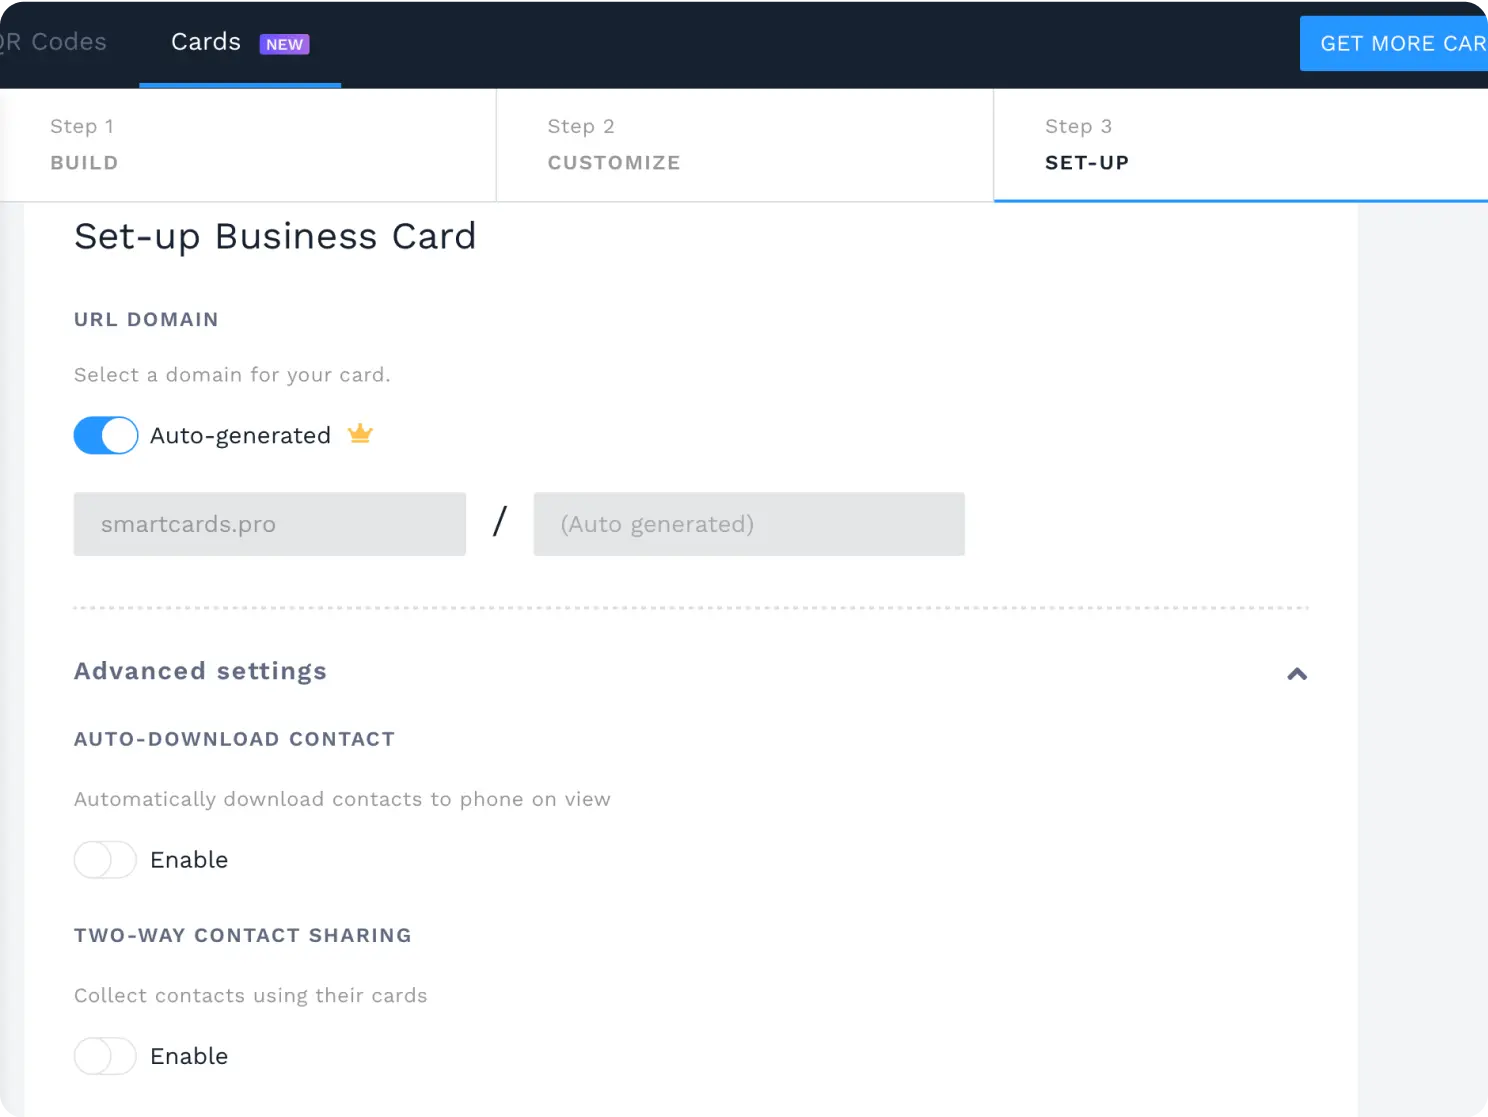 Enable advanced card features per your requirements